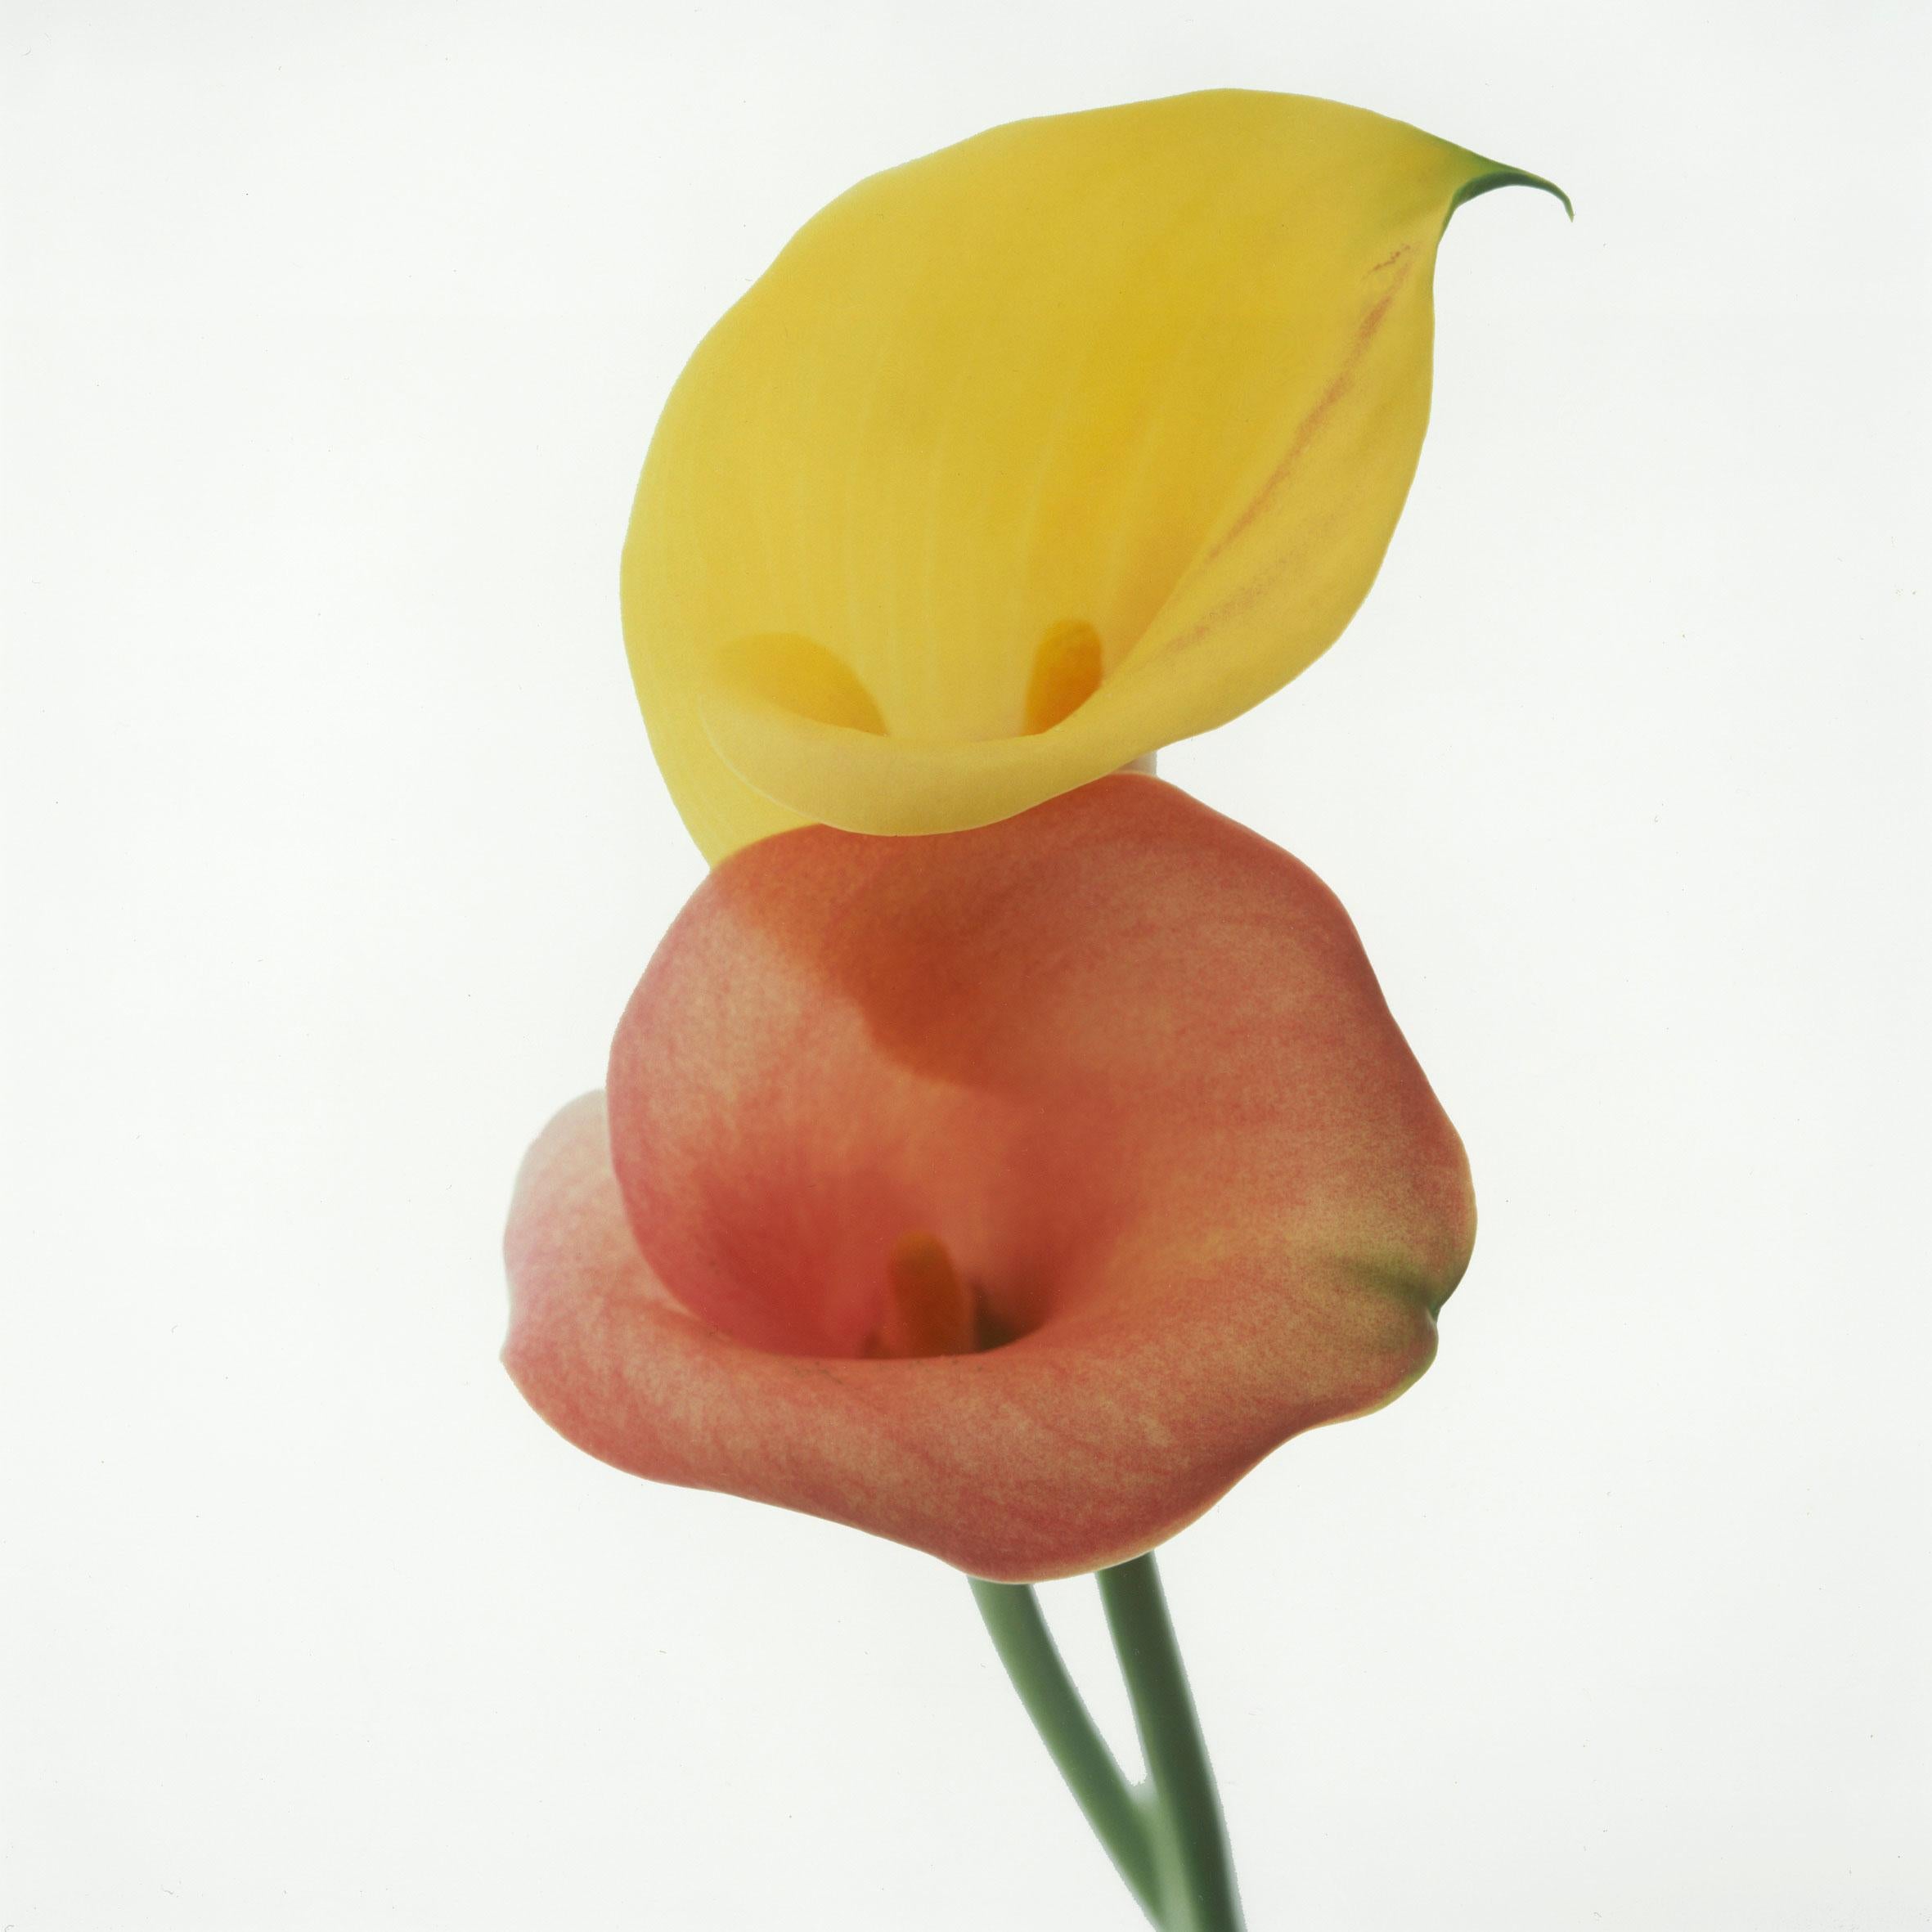 Calla Lilies, Sill Life Flowers, Pigment Print, from medium format transparency